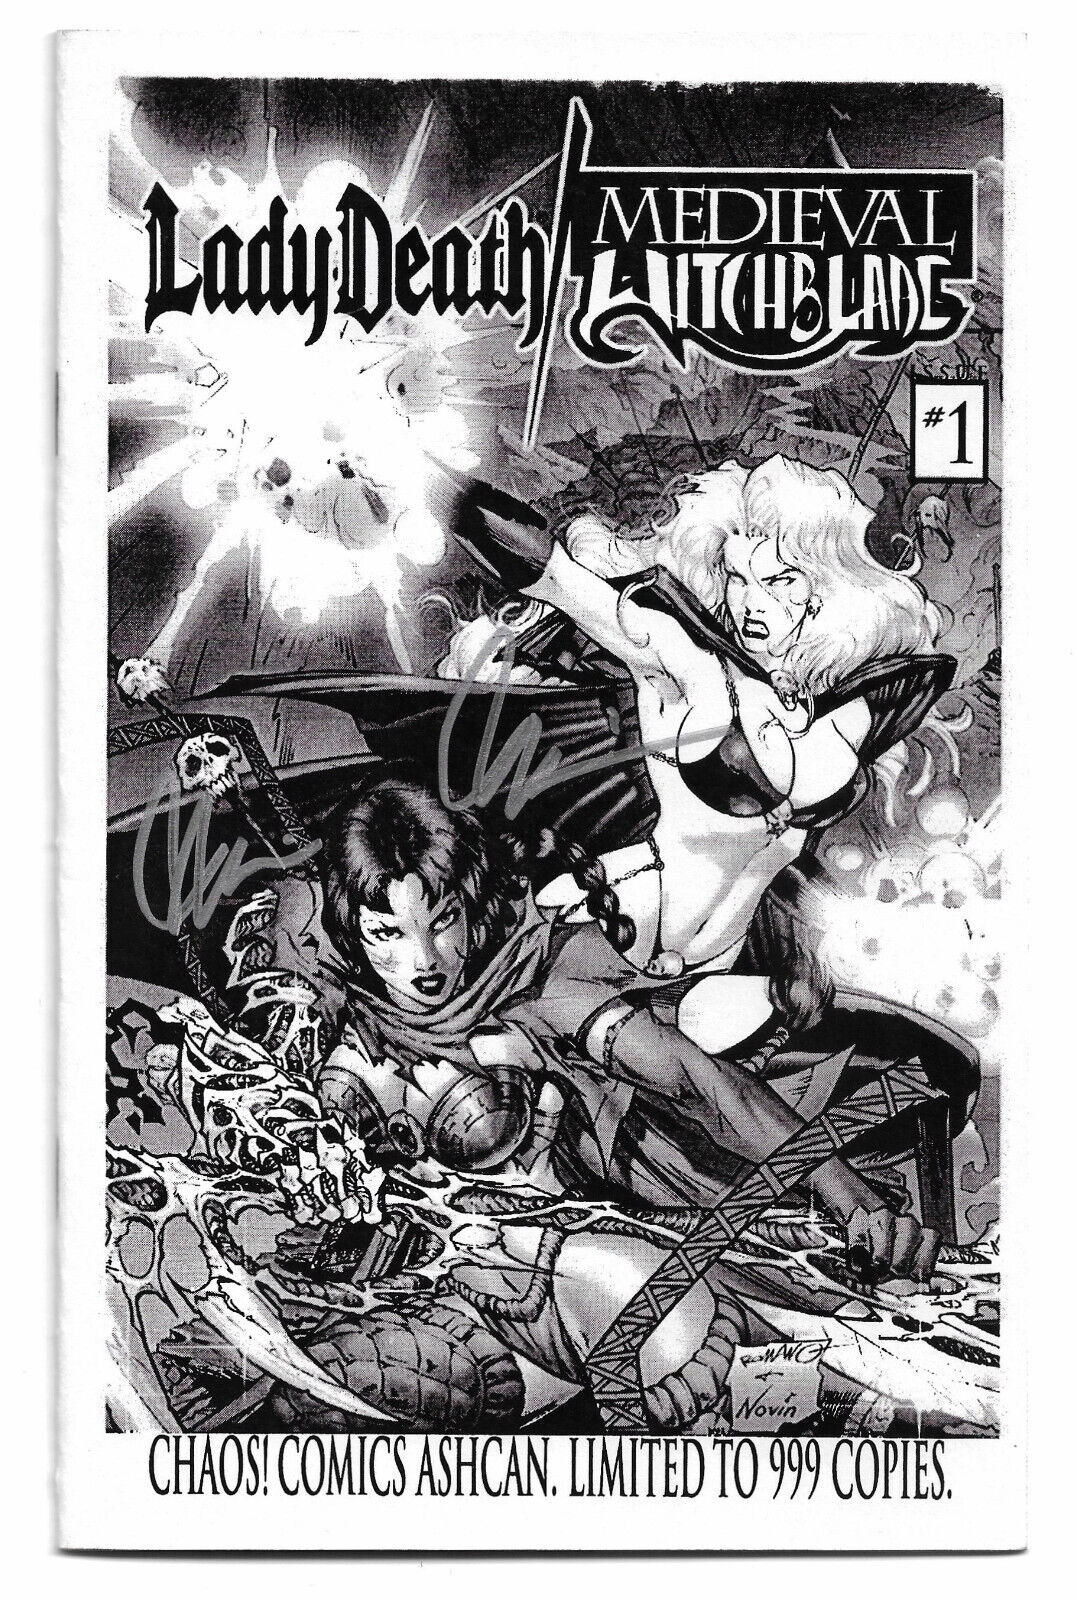 Lady Death Medieval Witchblade Ashcan Preview Limited 999 Chaos Comics 2001